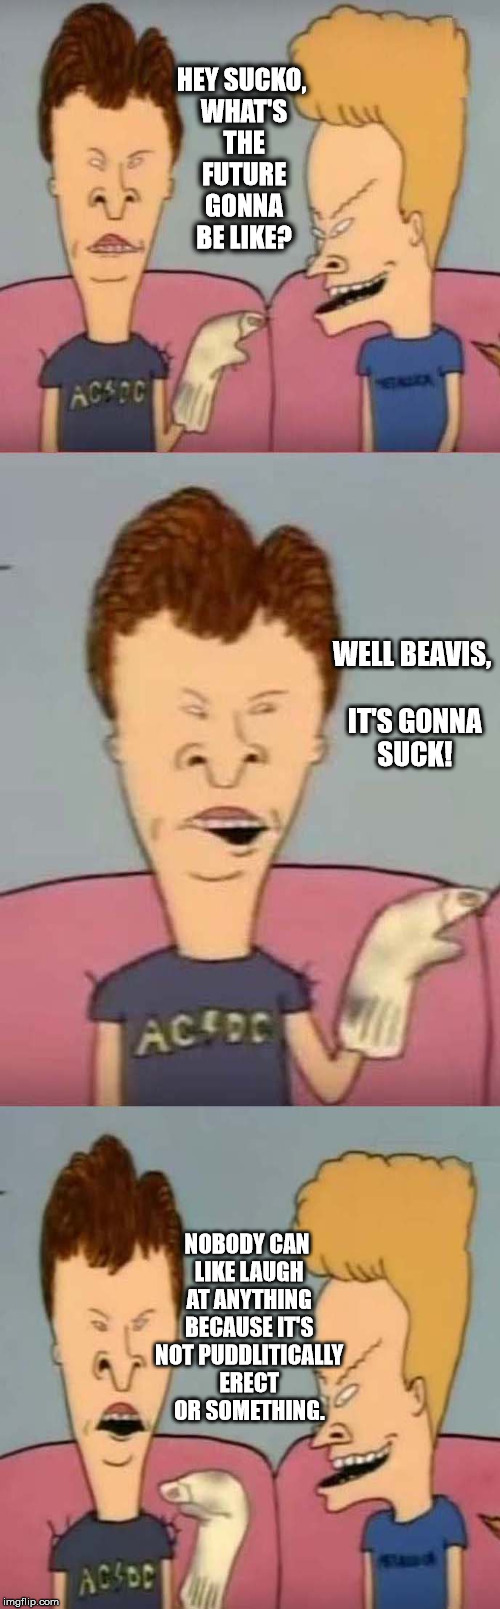 Beavis future 665 | HEY SUCKO, WHAT'S THE FUTURE GONNA BE LIKE? WELL BEAVIS, IT'S GONNA SUCK! NOBODY CAN LIKE LAUGH AT ANYTHING BECAUSE IT'S NOT PUDDLITICALLY ERECT OR SOMETHING. | image tagged in beavis and butthead,future,sleep deprivation creations | made w/ Imgflip meme maker